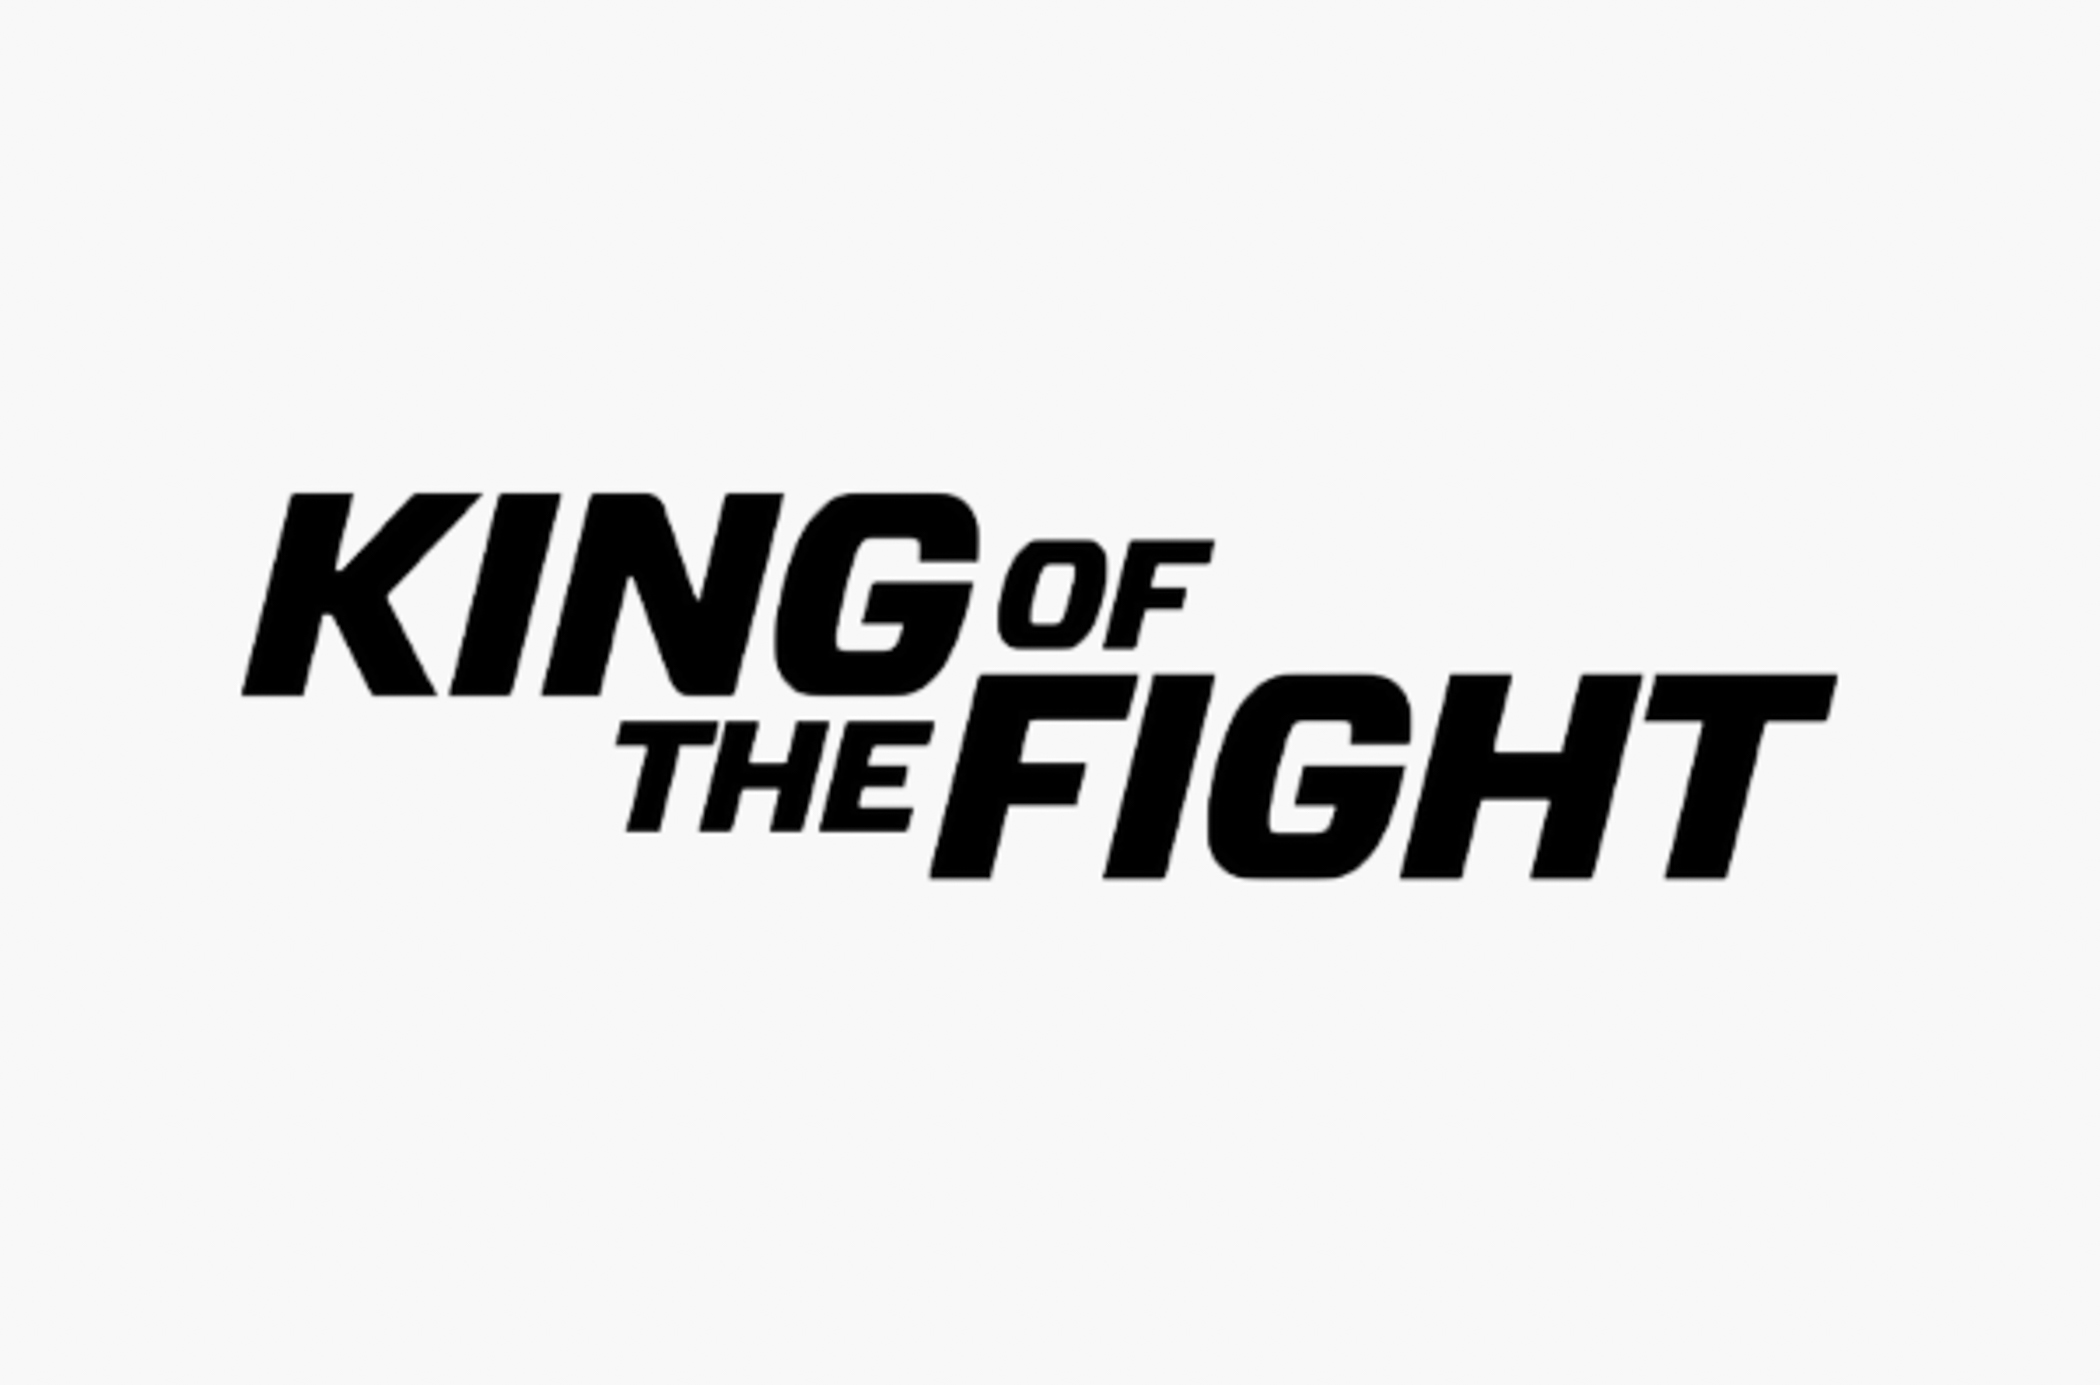 King of the Fight 7 to feature MMA, boxing and kickboxing